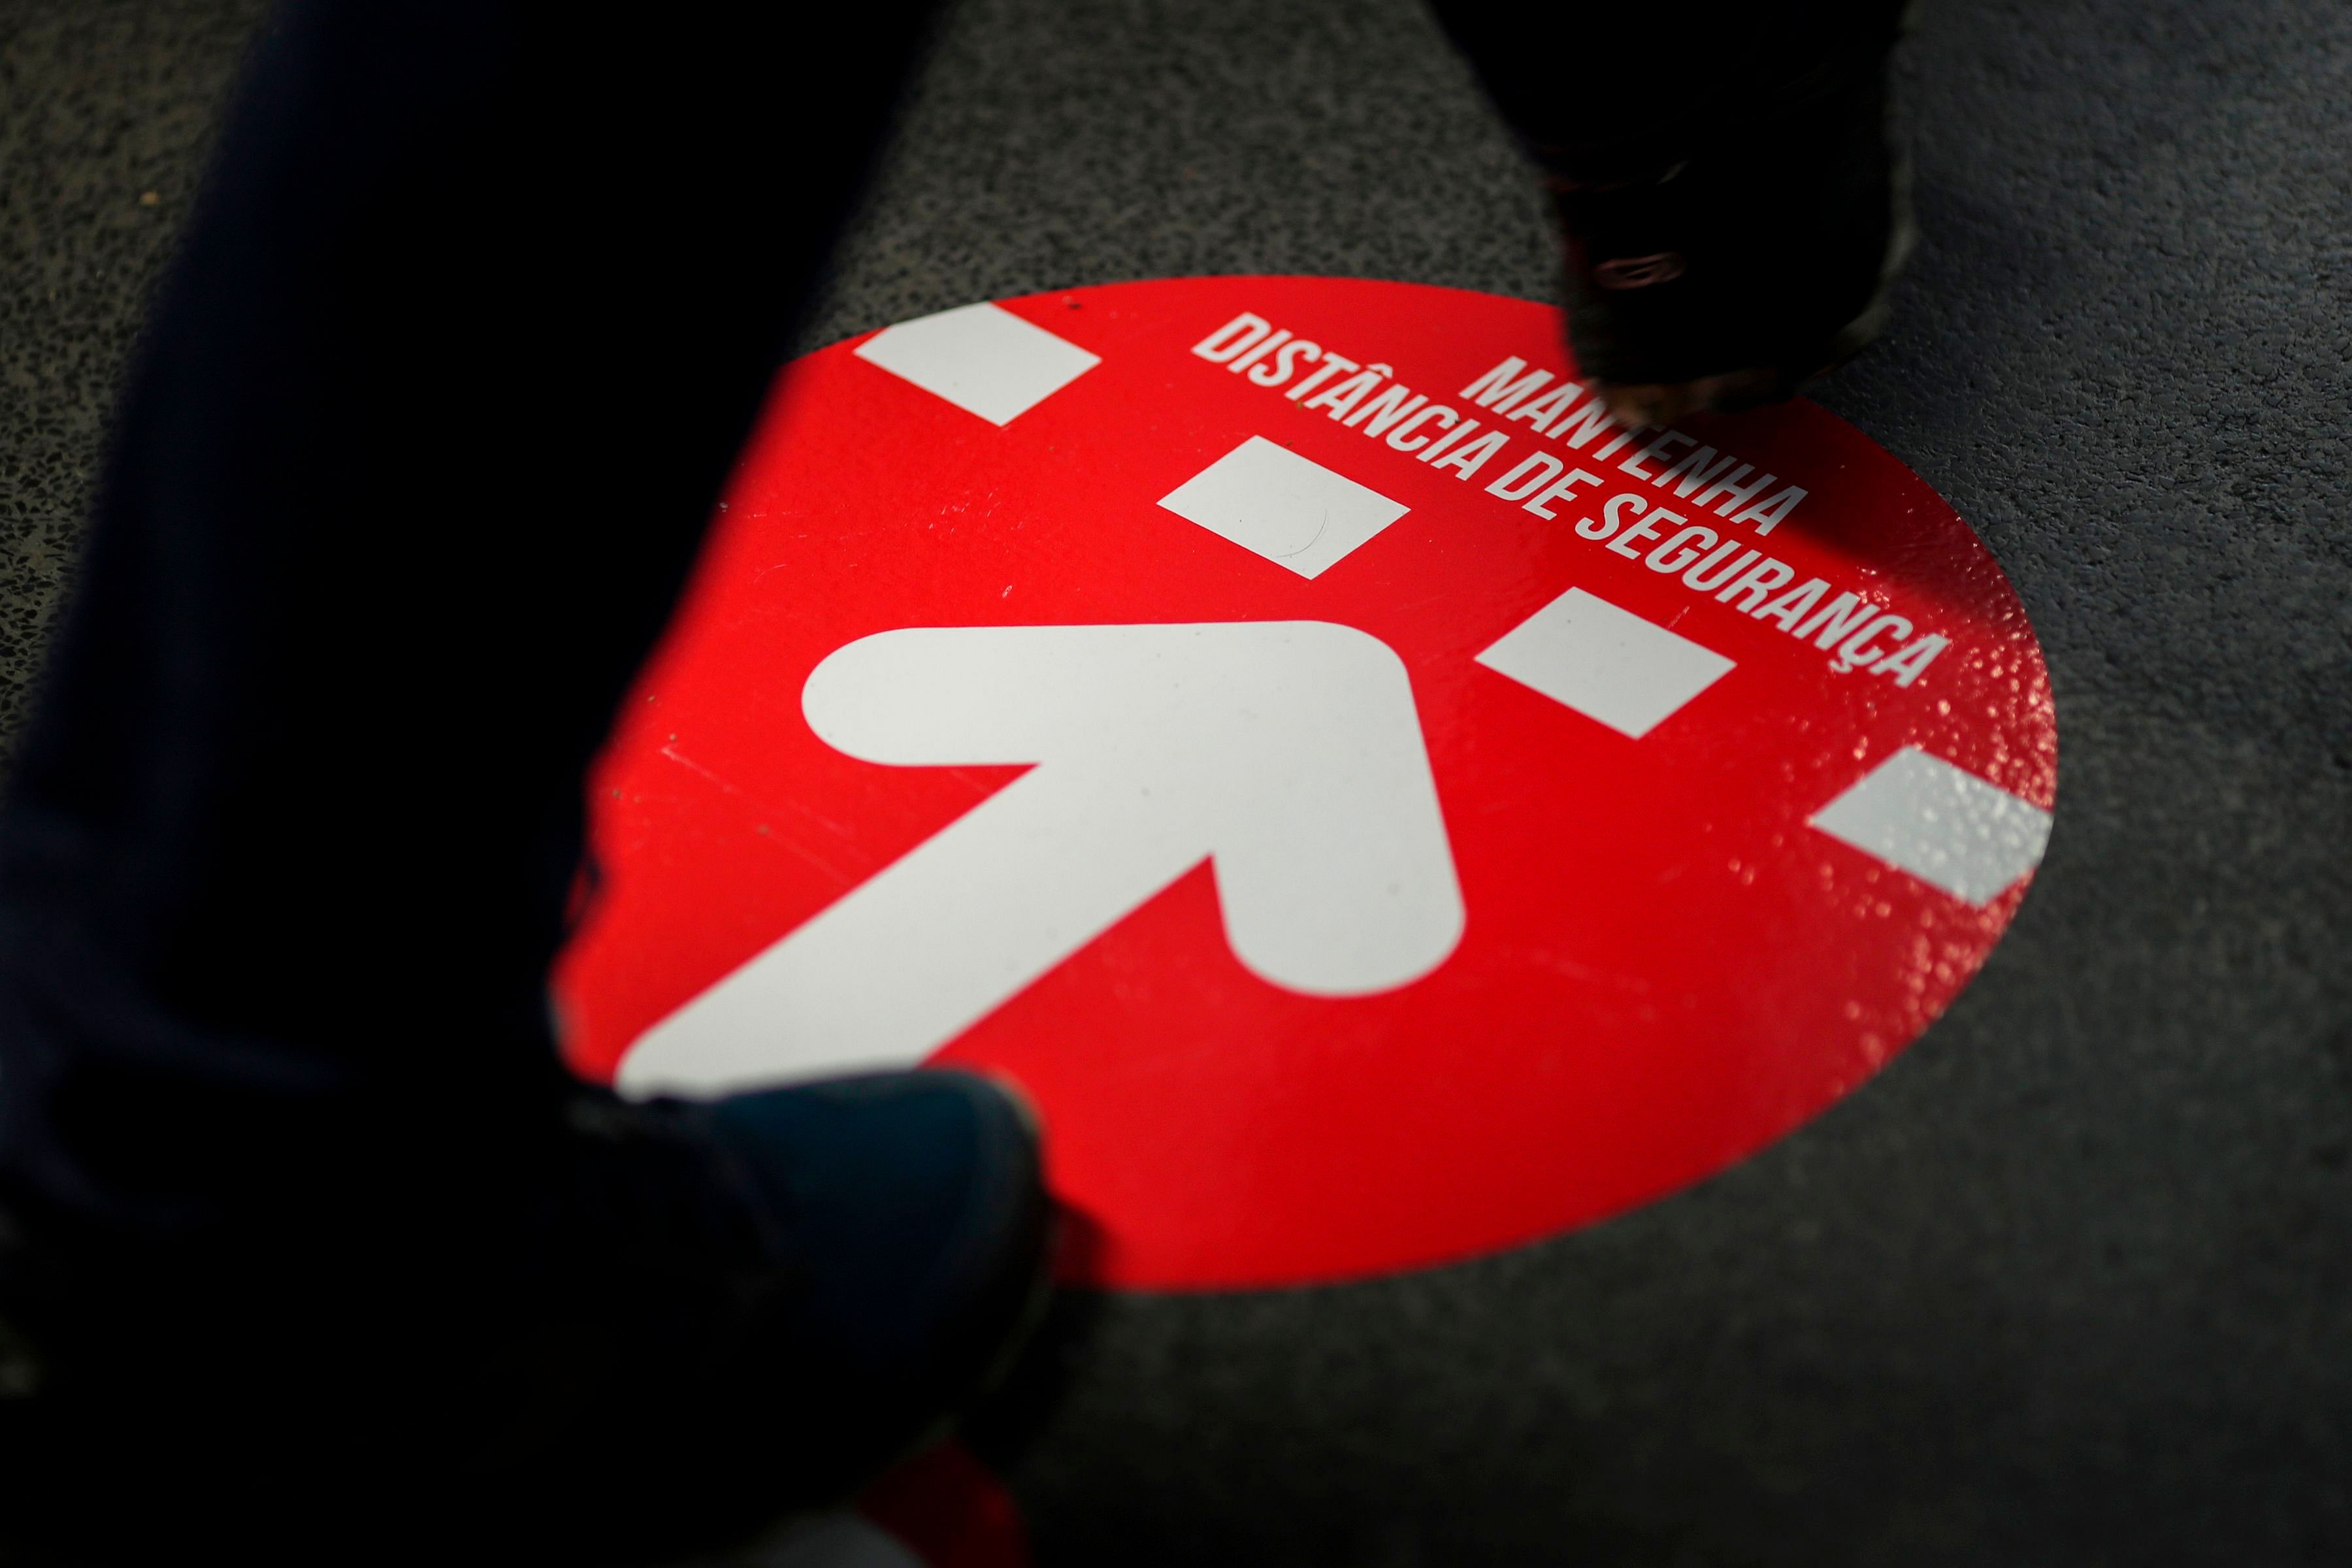 A voter walks over a social distancing sign during the Portuguese presidential election at a polling station in Parque das Nacoes in Lisbon on January 24, 2021. - Portugal is voting despite the country's pandemic lockdown. Credit: AFP Photo